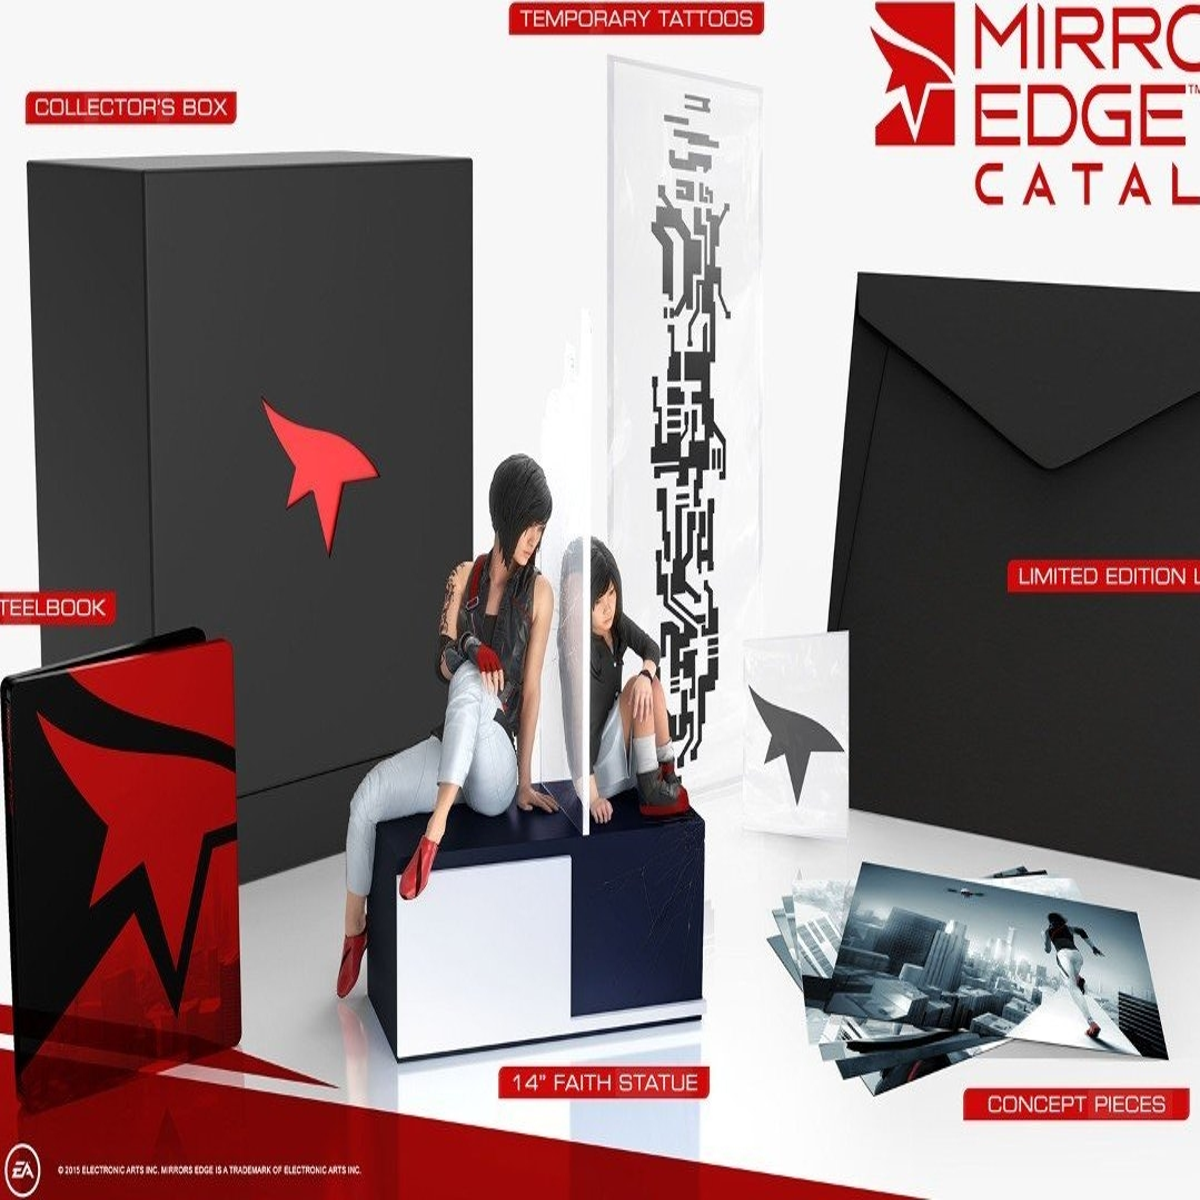 Explore Mirror's Edge Catalyst when it launches in February